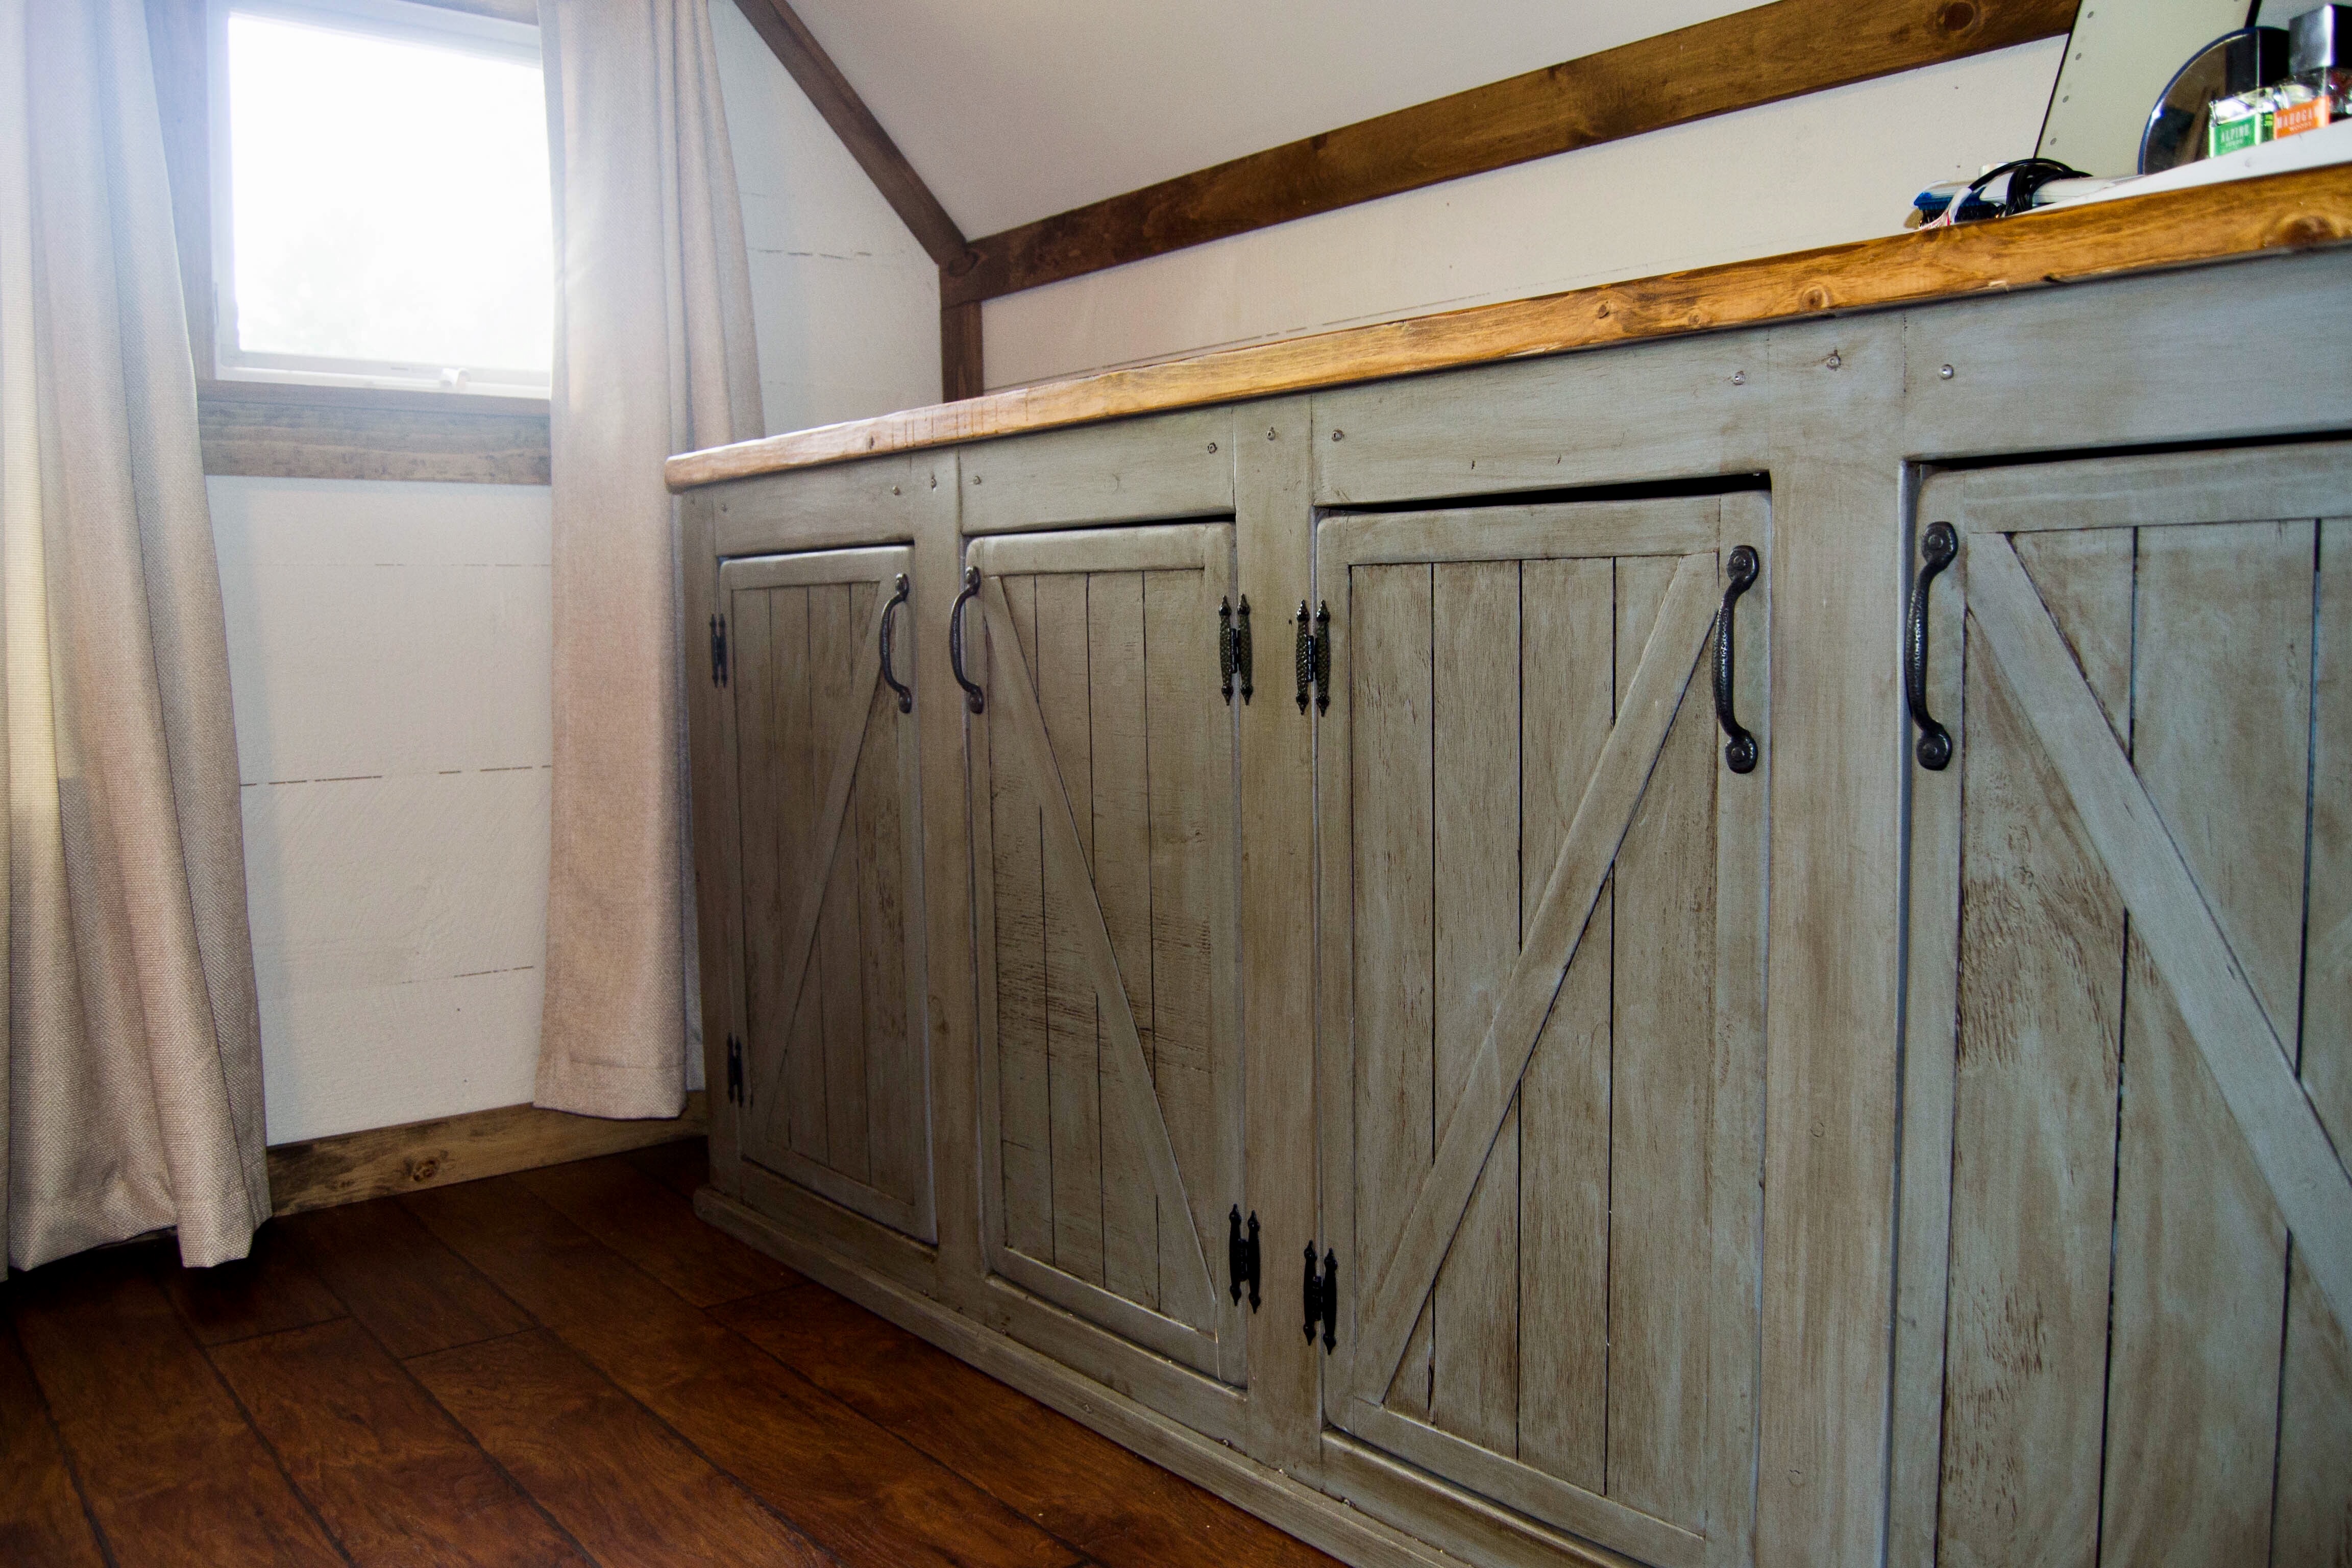 Scrapped the Sliding Barn Doors, Rustic Cabinet Doors Instead | Ana White